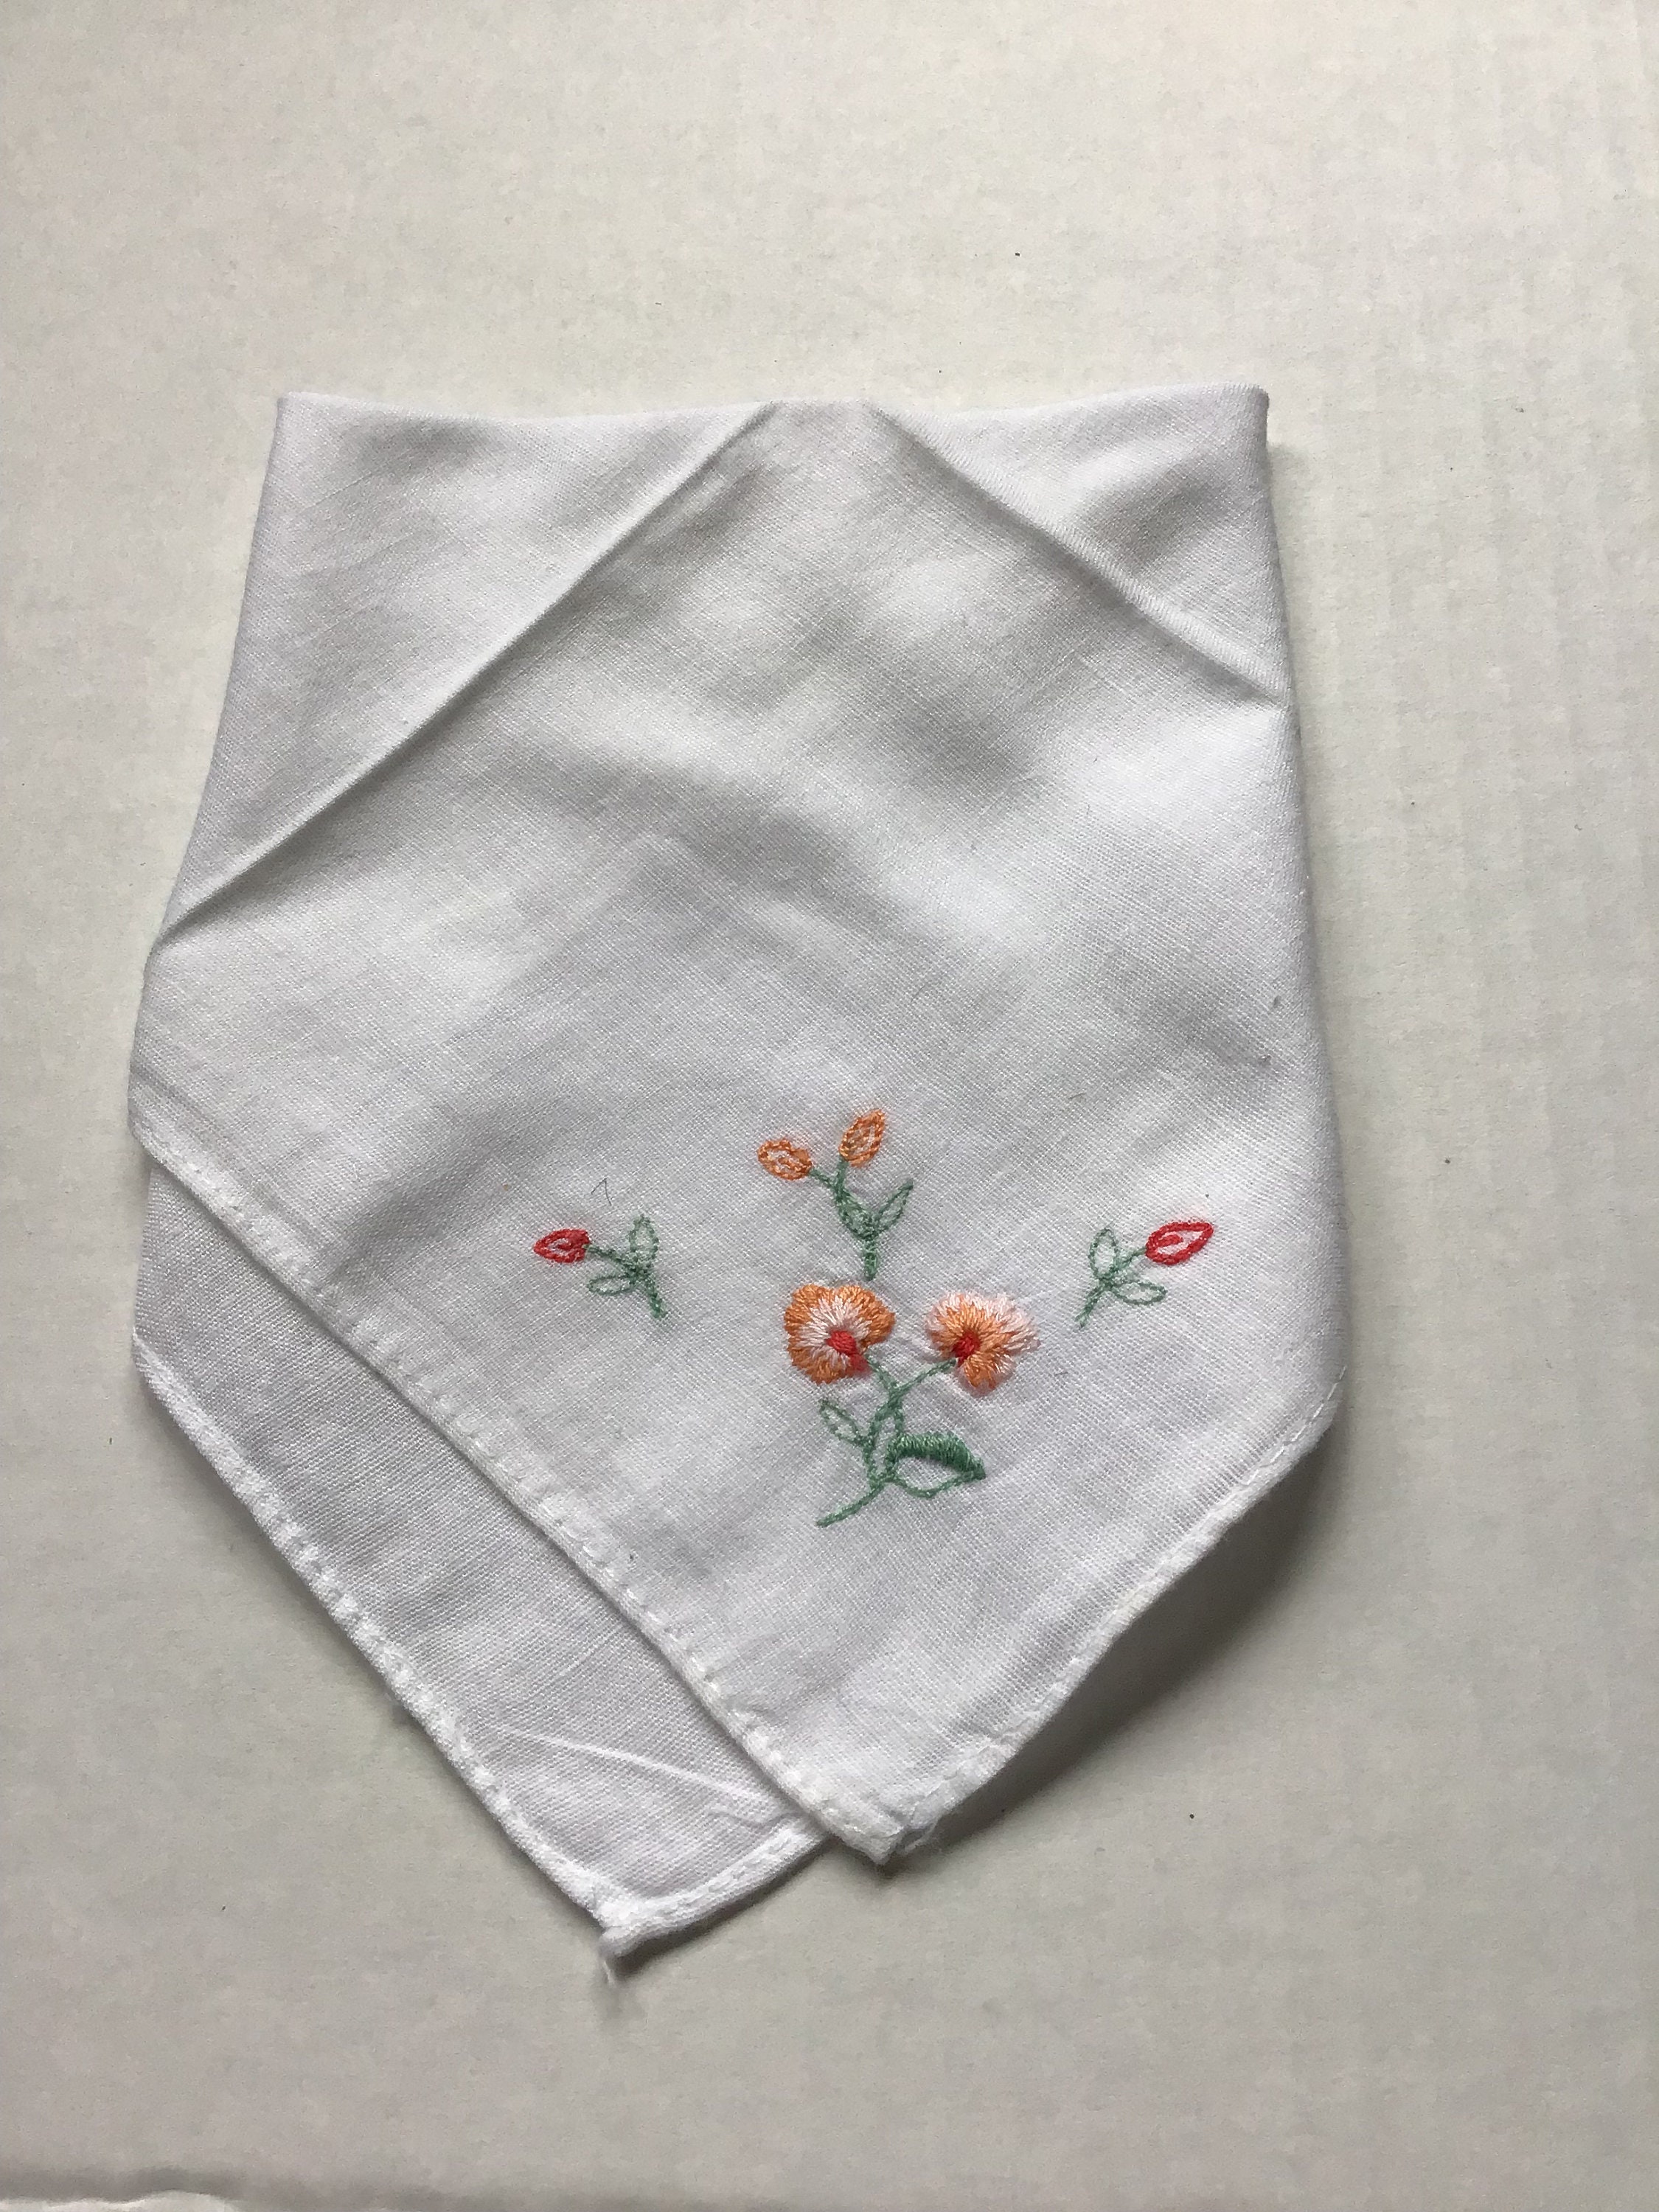 Vintage Hanky White on White Embroidery 10 1/2 Square Cotton Handkerchief with Embroidered Corner Pulled Thread Edge